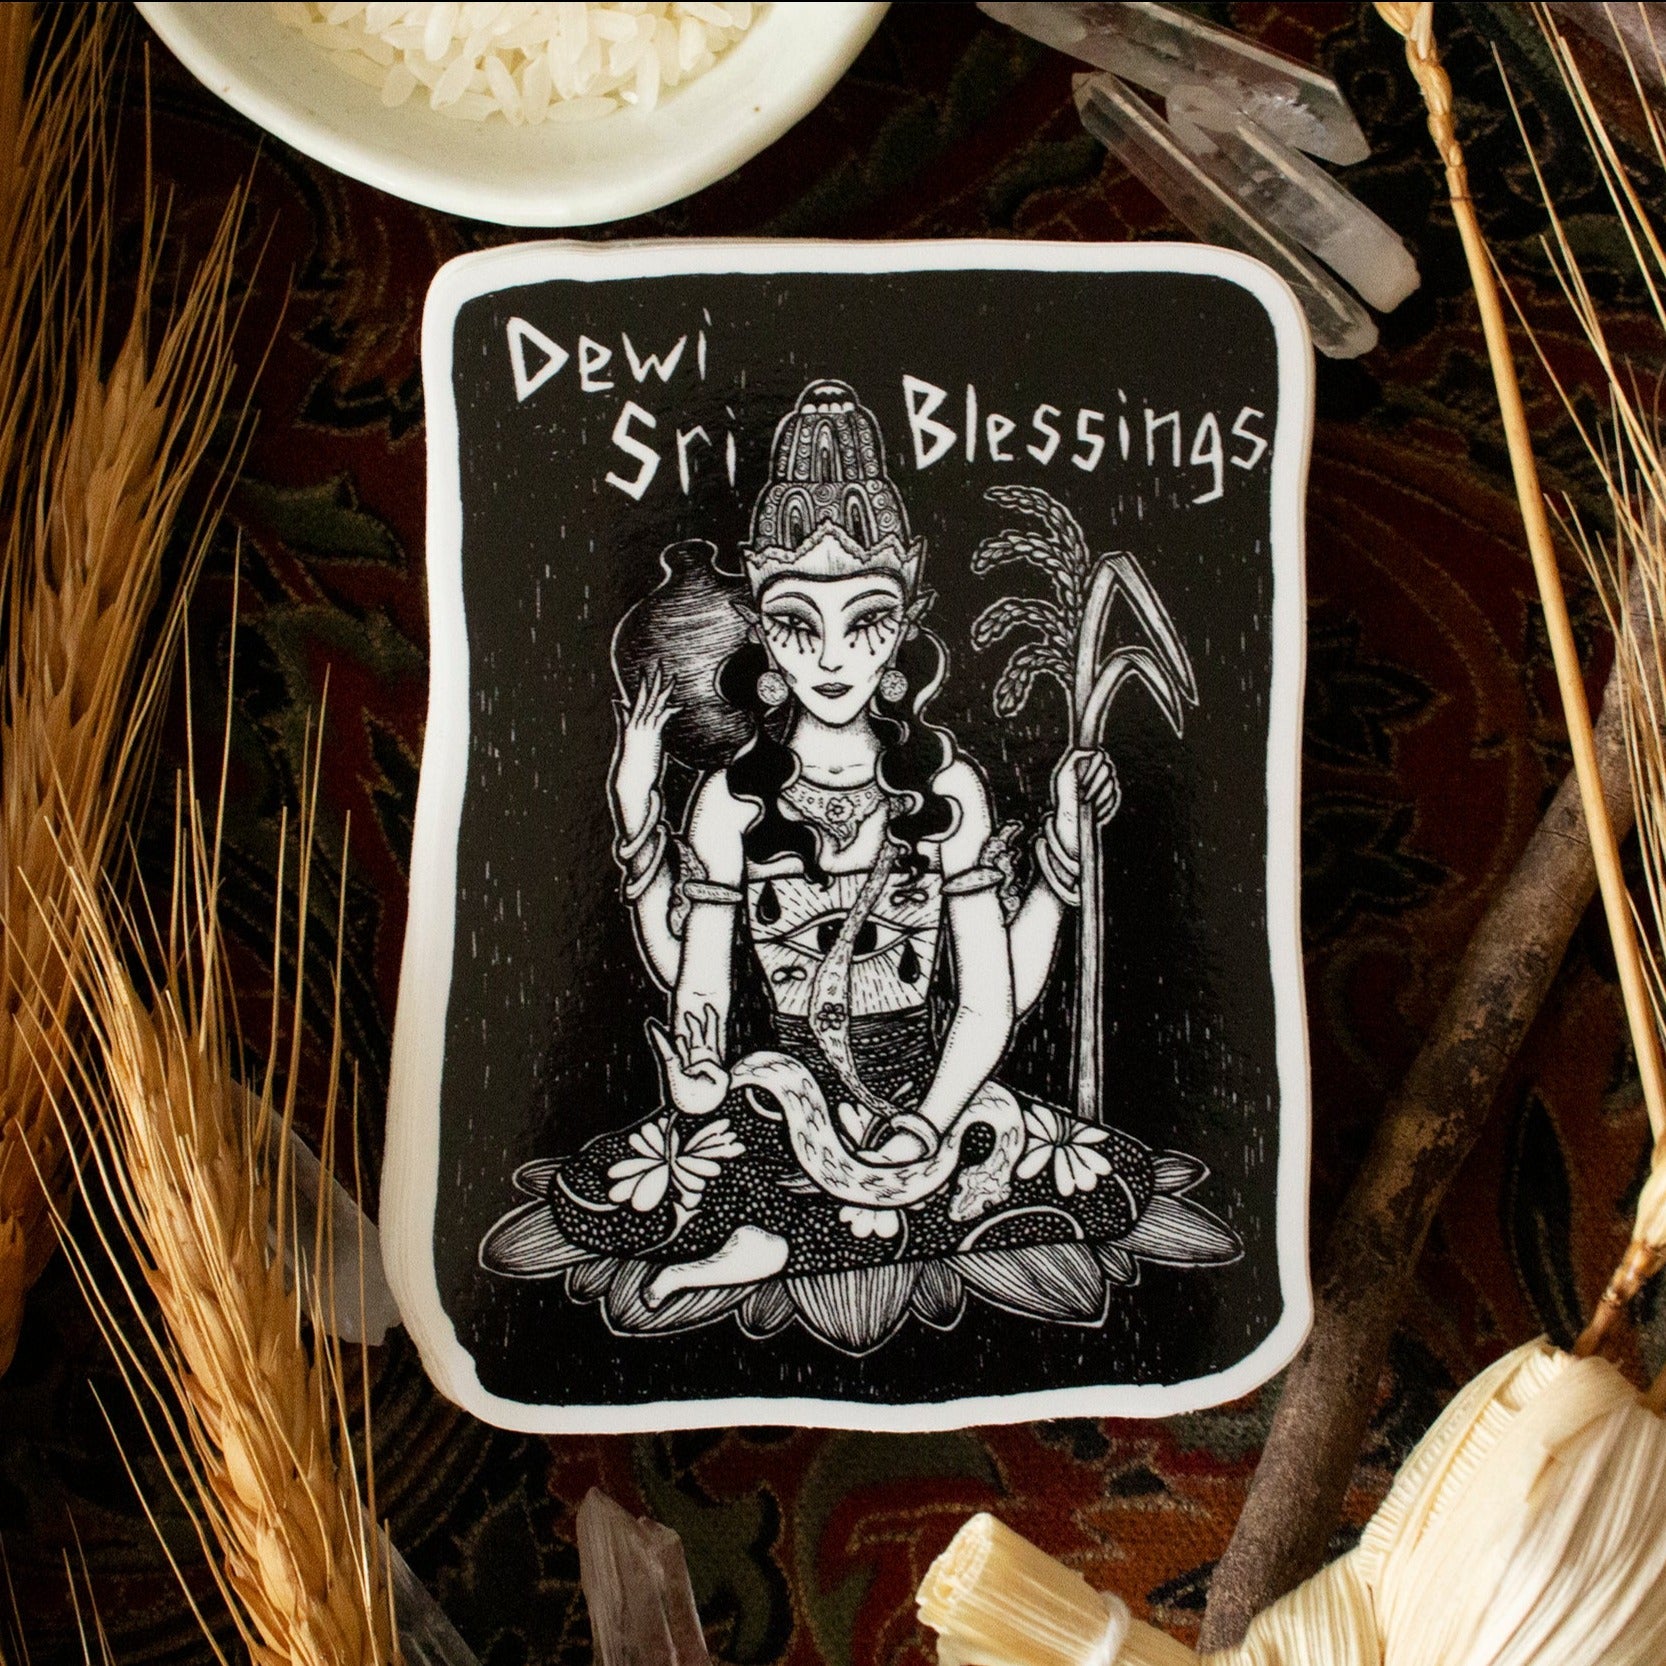 Dewi Sri Blessings vinyl sticker surrounded by grains